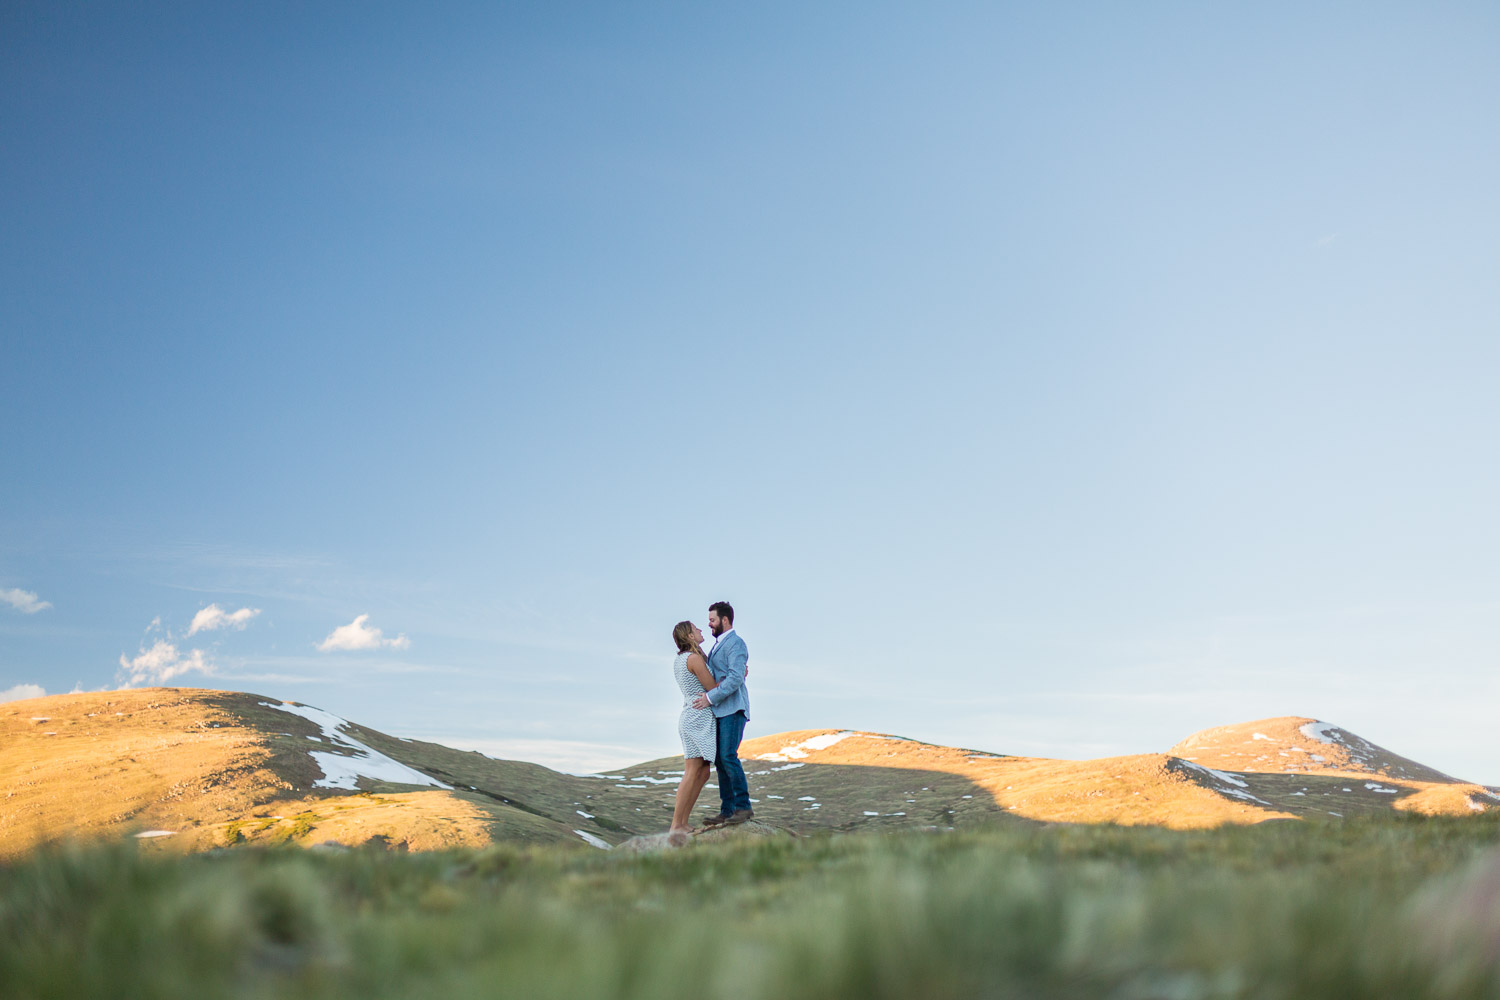 Colorado Mountain Engagement Session with Mountain Views